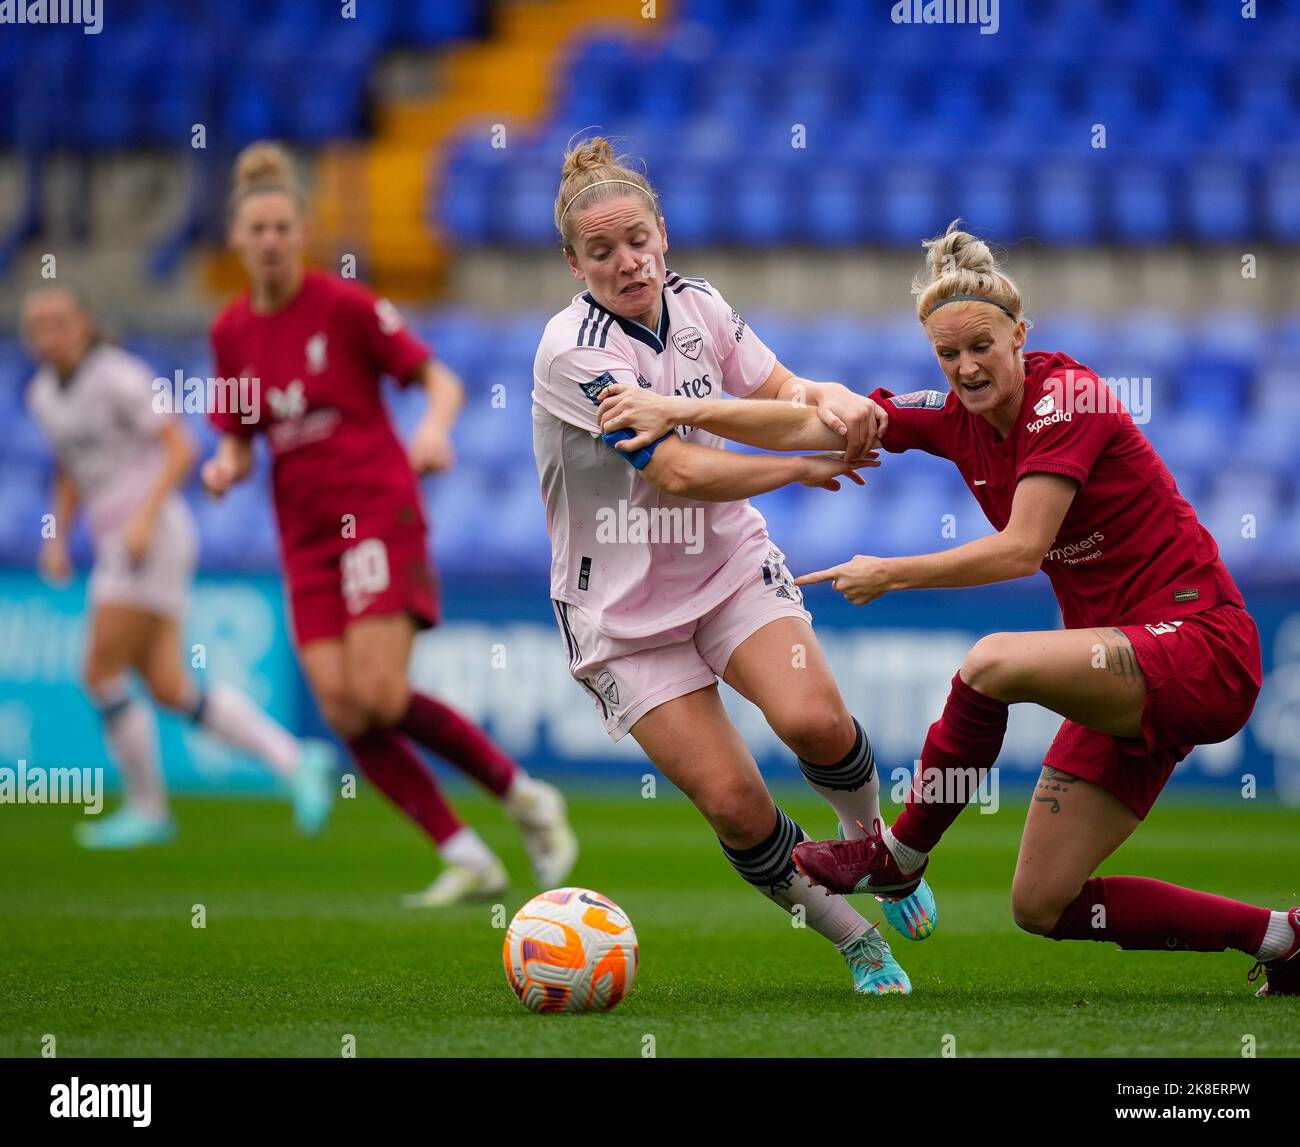 Liverpool, UK. 23rd Oct, 2022. Liverpool, England, October 23rd 2022: Jasmine Matthews (6 Liverpool) and Kim Little (10 Arsenal) battle for the ball during the Barclays Womens Super League football match between Liverpool and Arsenal at Prenton Park in Liverpool, England. (James Whitehead/SPP) Credit: SPP Sport Press Photo. /Alamy Live News Stock Photo